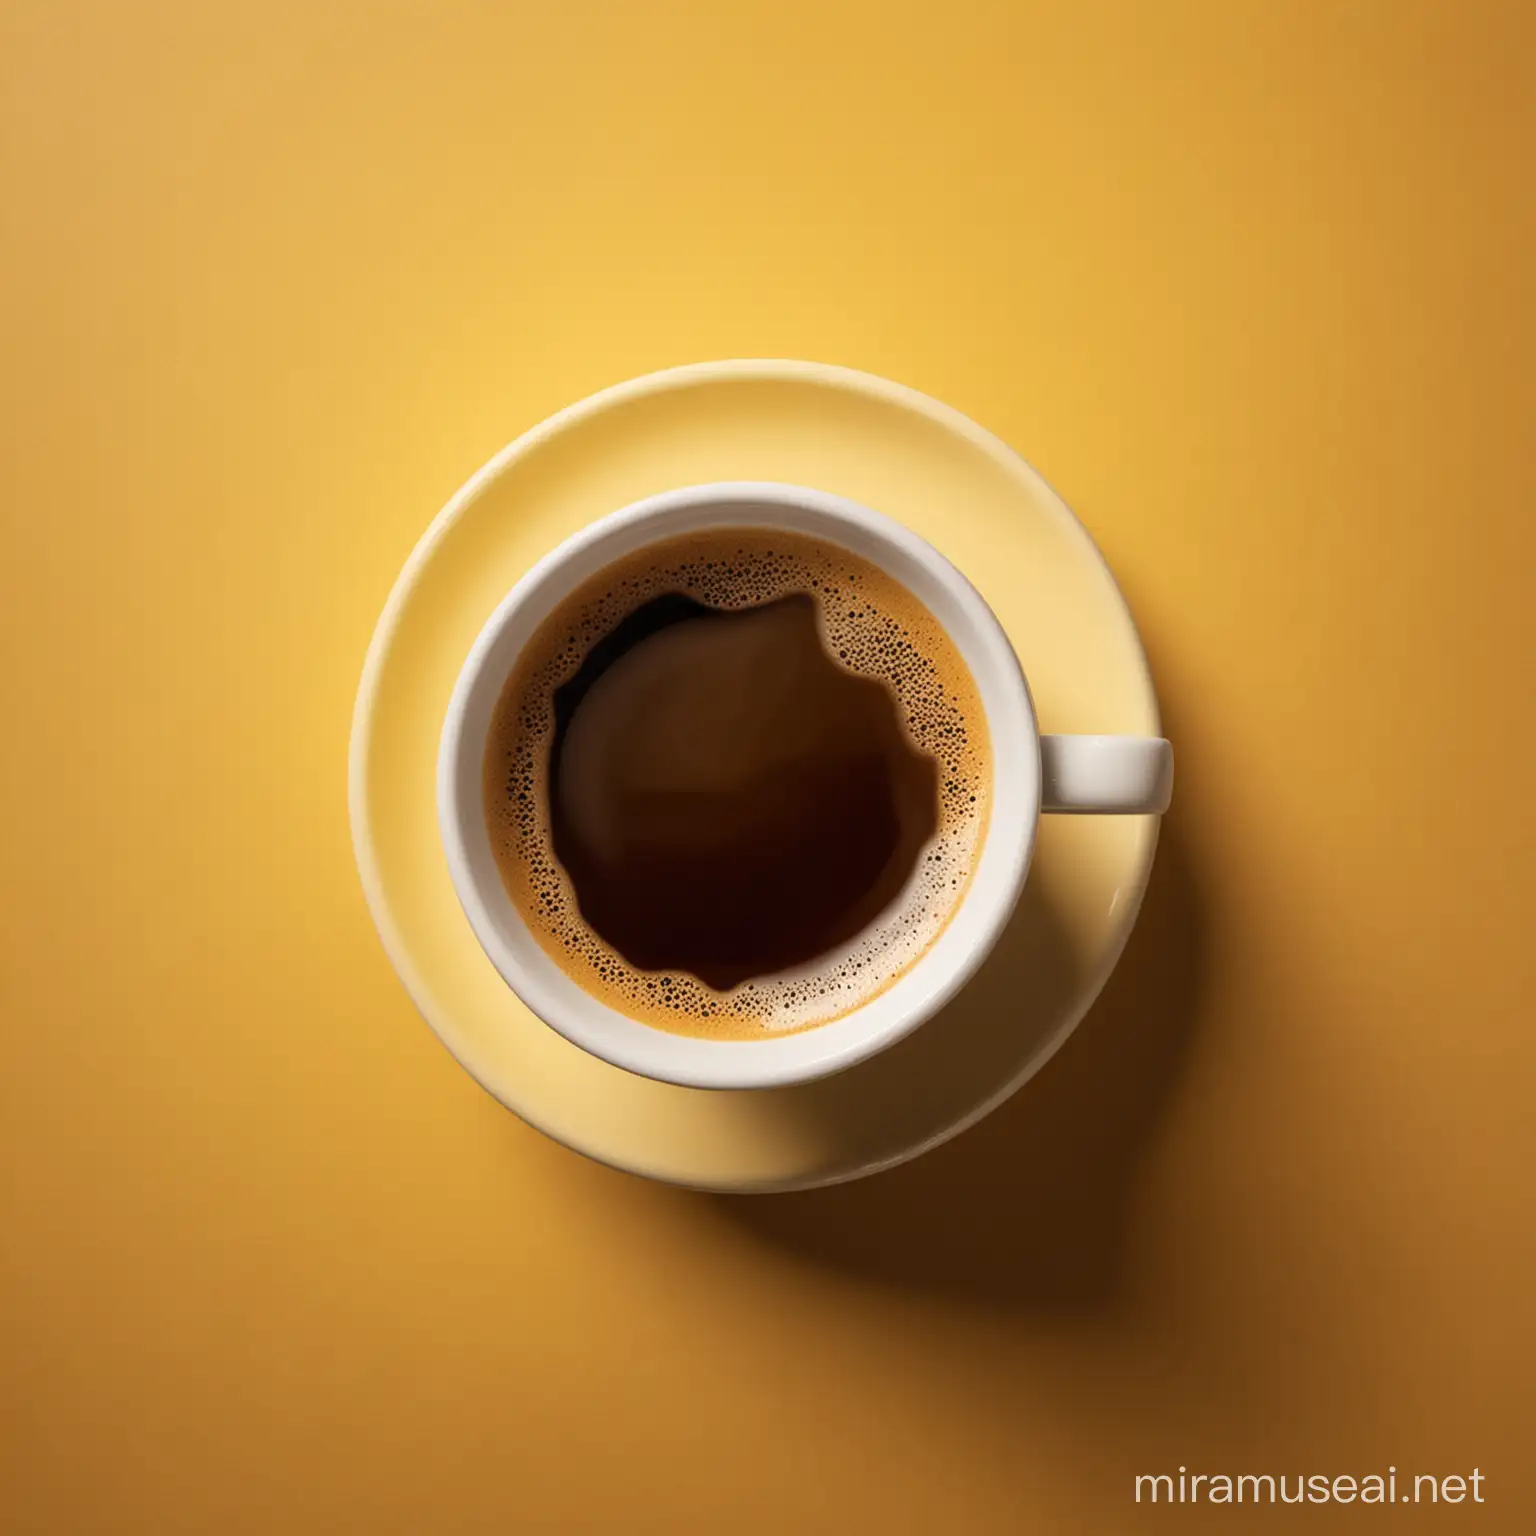 Vibrant Cup of Coffee on Sunny Yellow Background